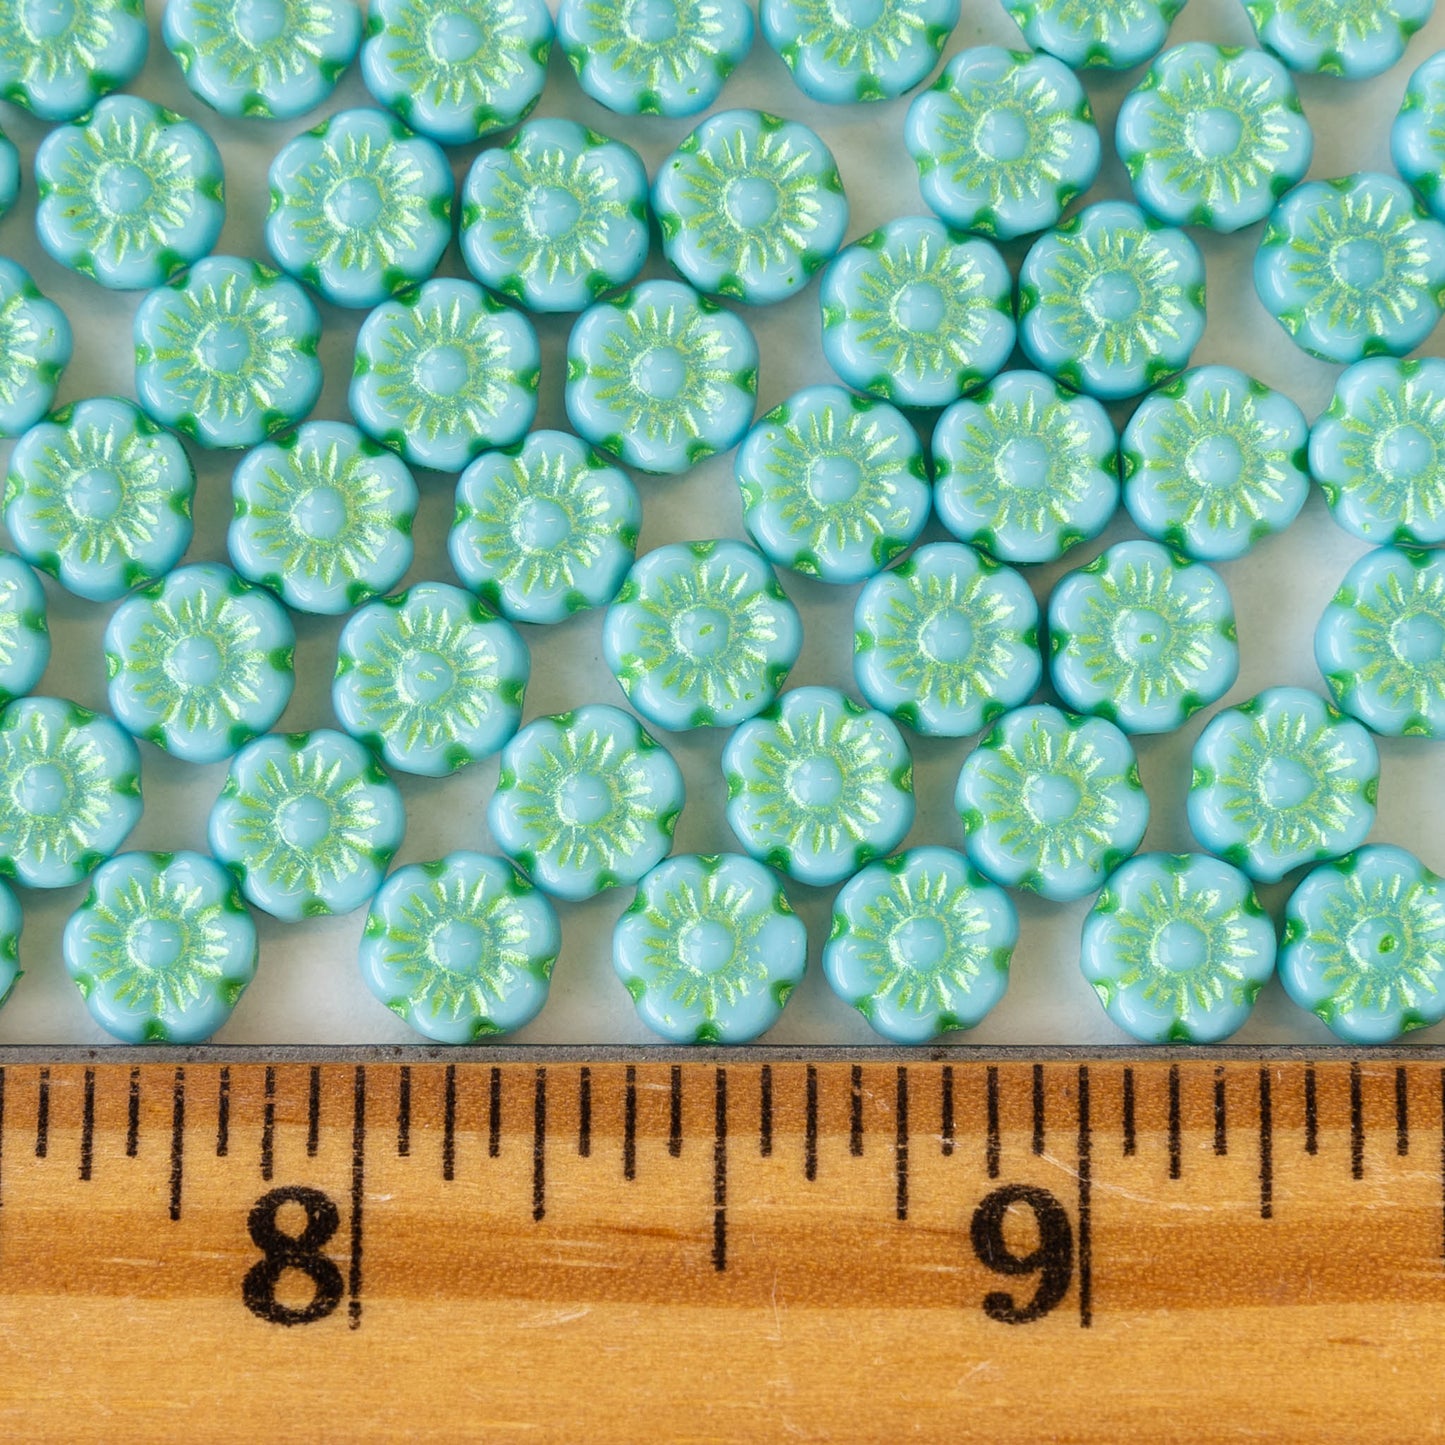 6mm Glass Flower Beads - Turquoise with Green Wash - 30 beads